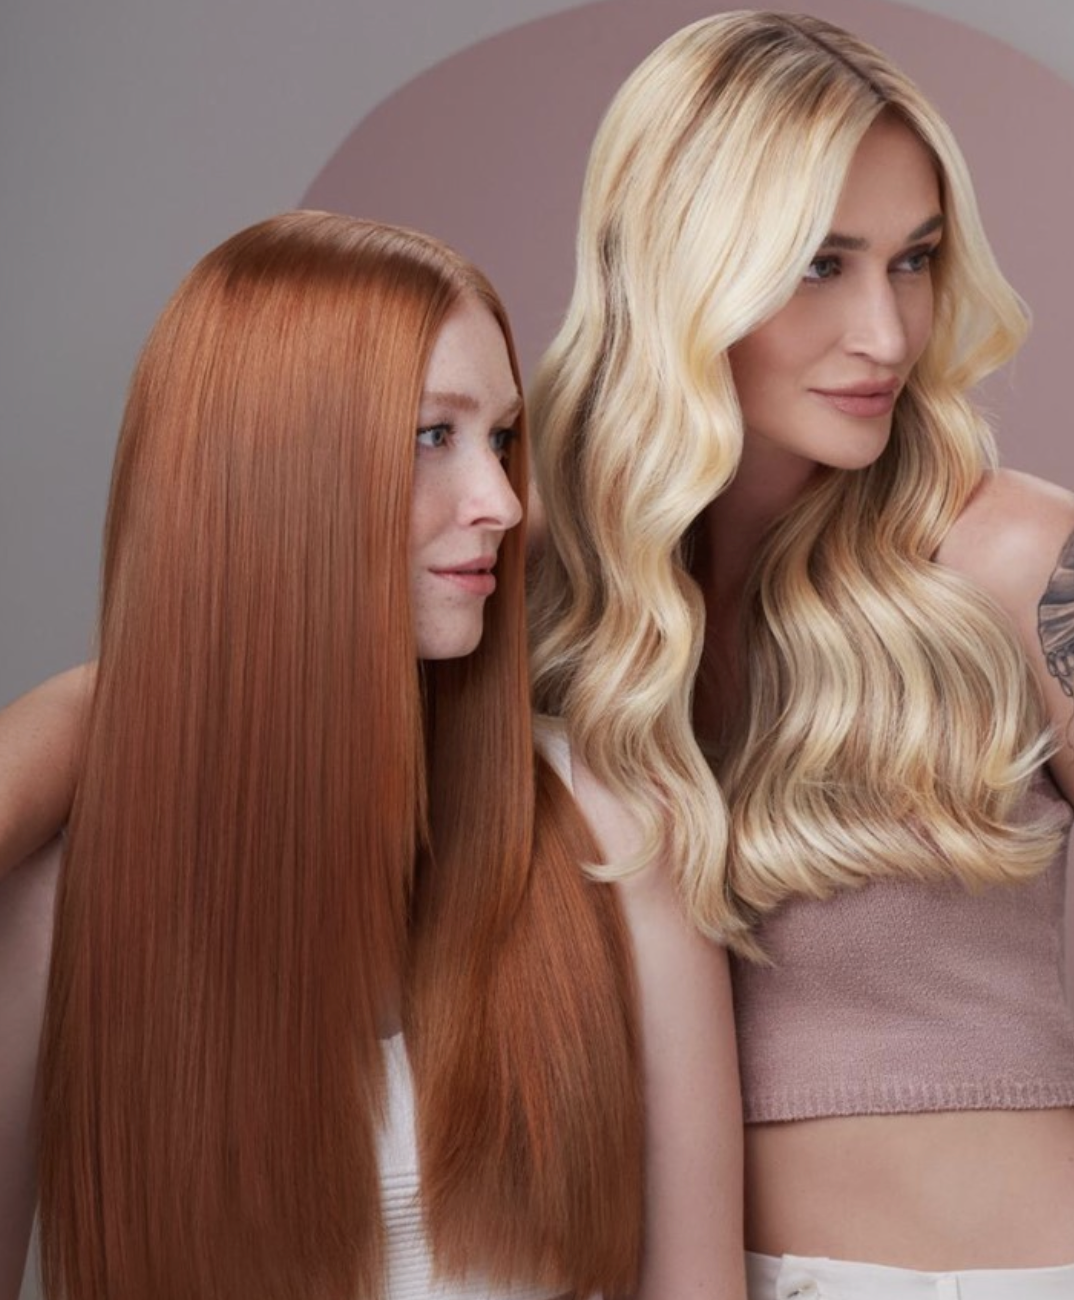 How to Achieve the Perfectly Clean Blonde Look: A Step-by-Step Guide